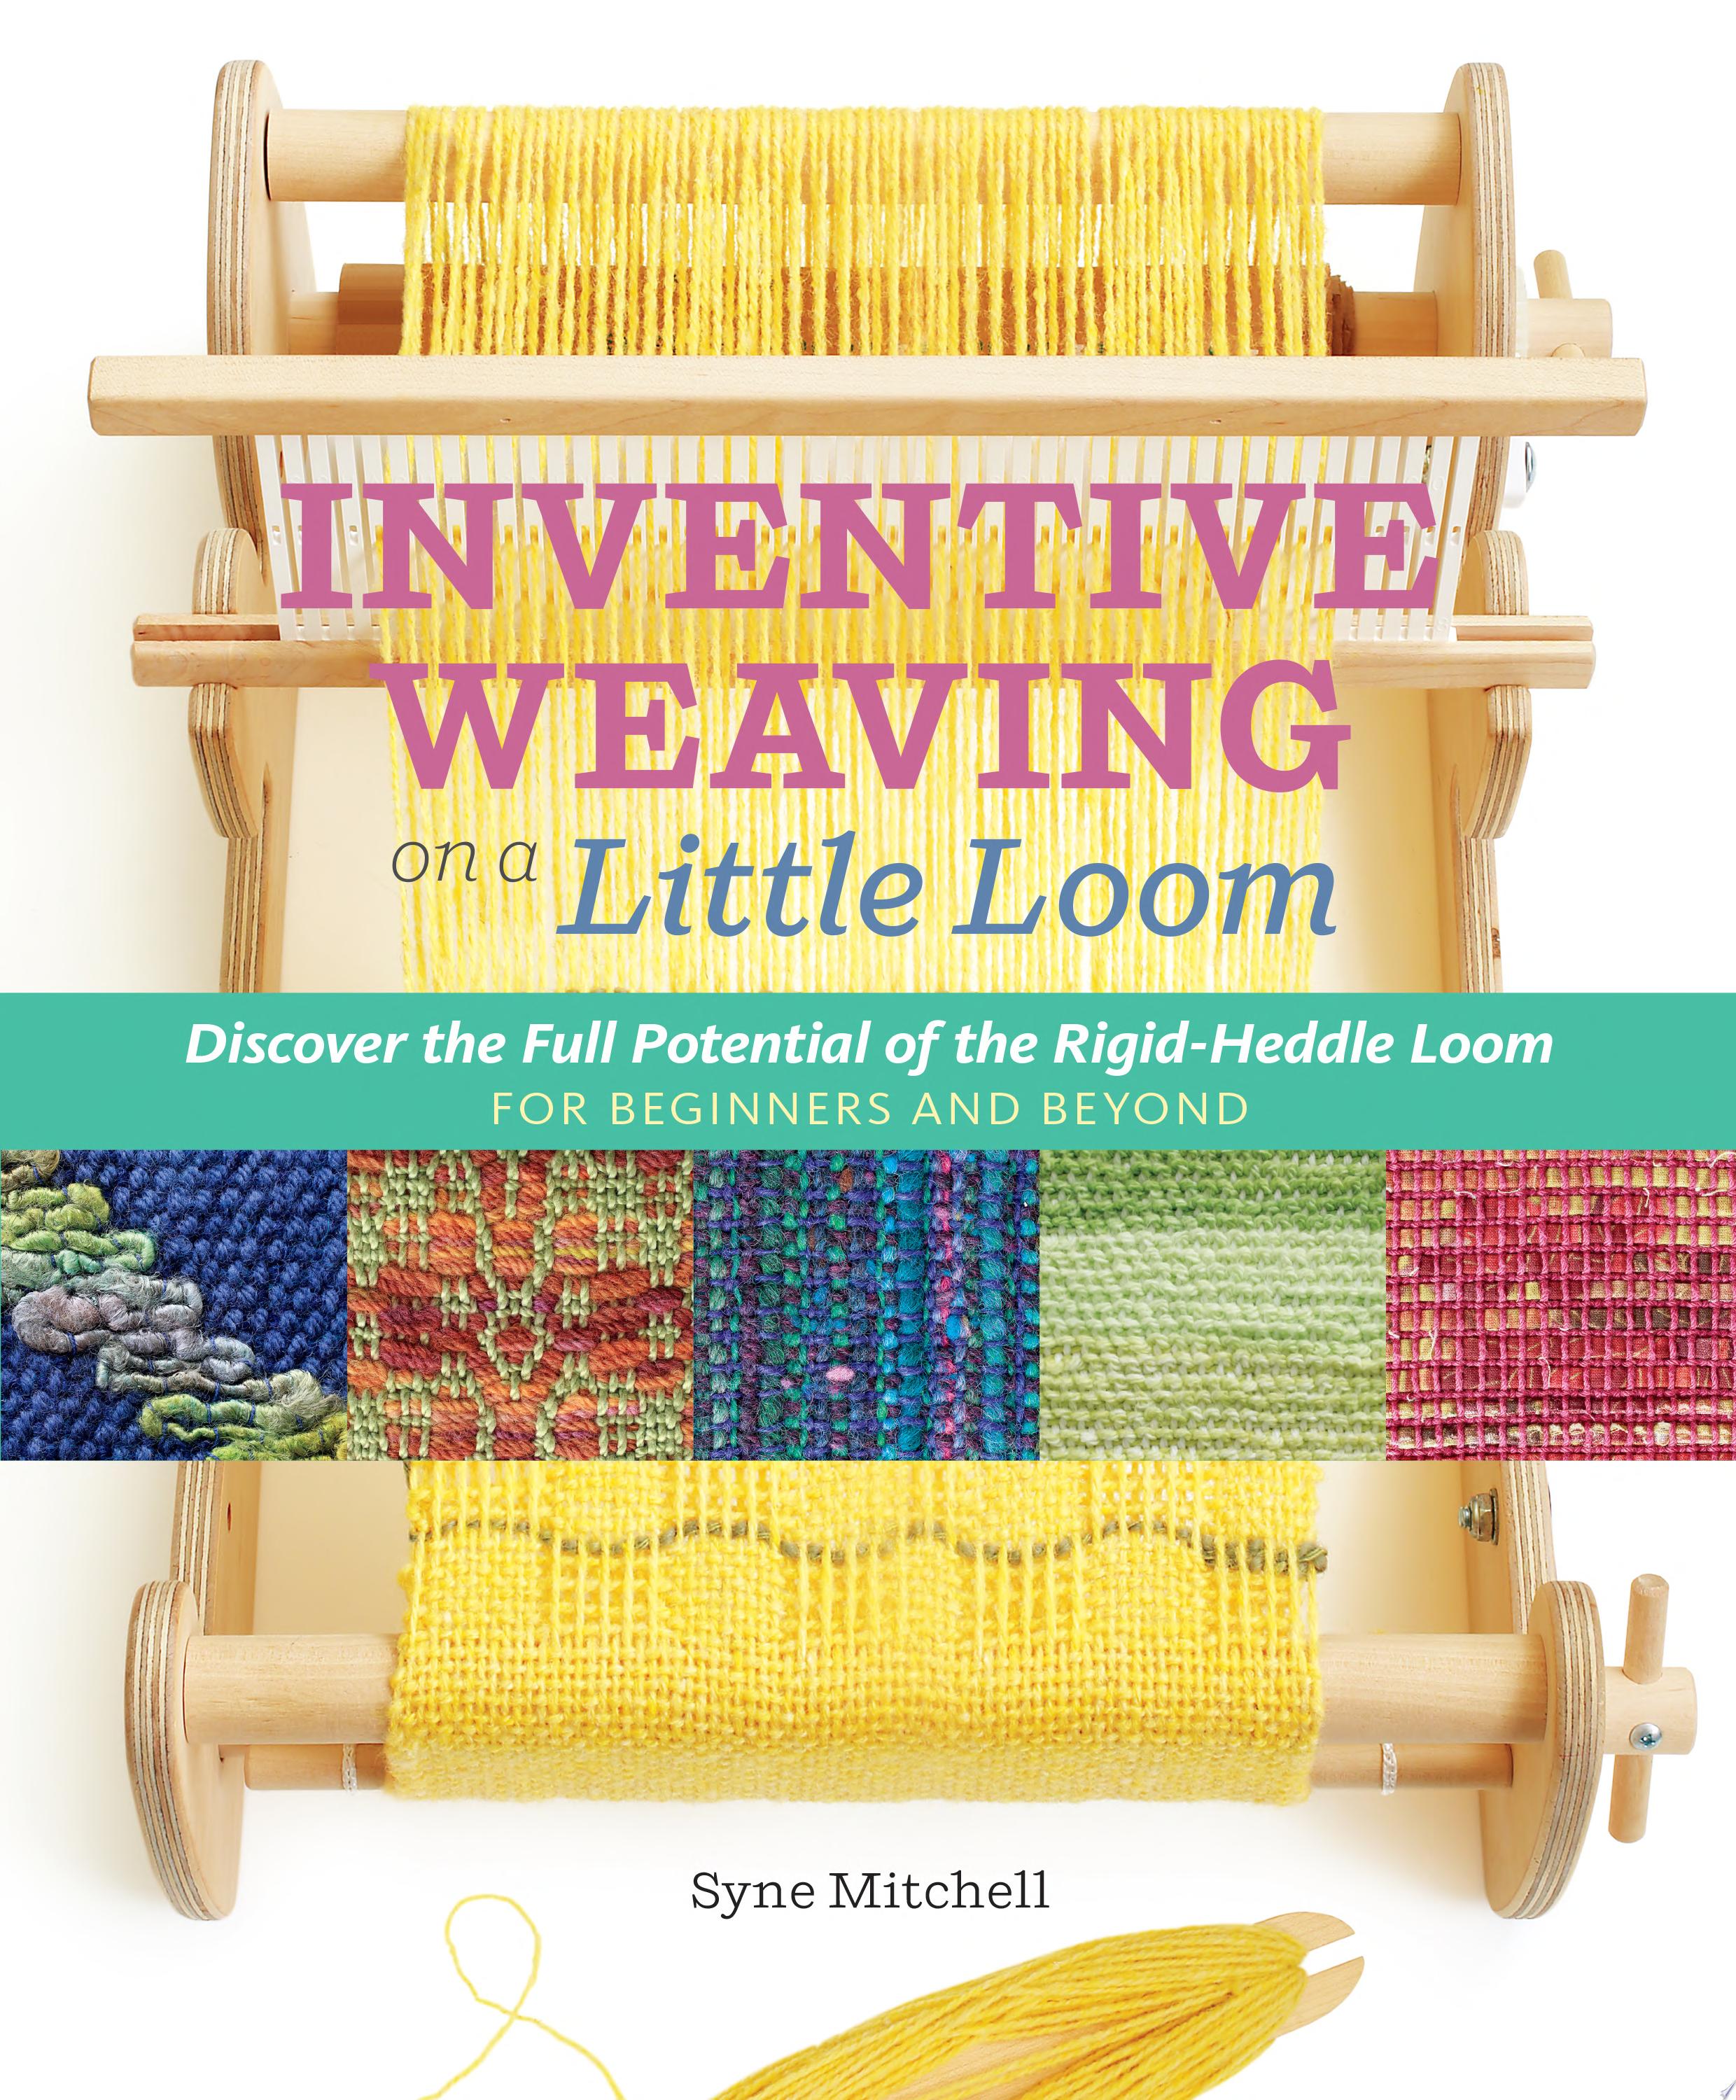 Image for "Inventive Weaving on a Little Loom"